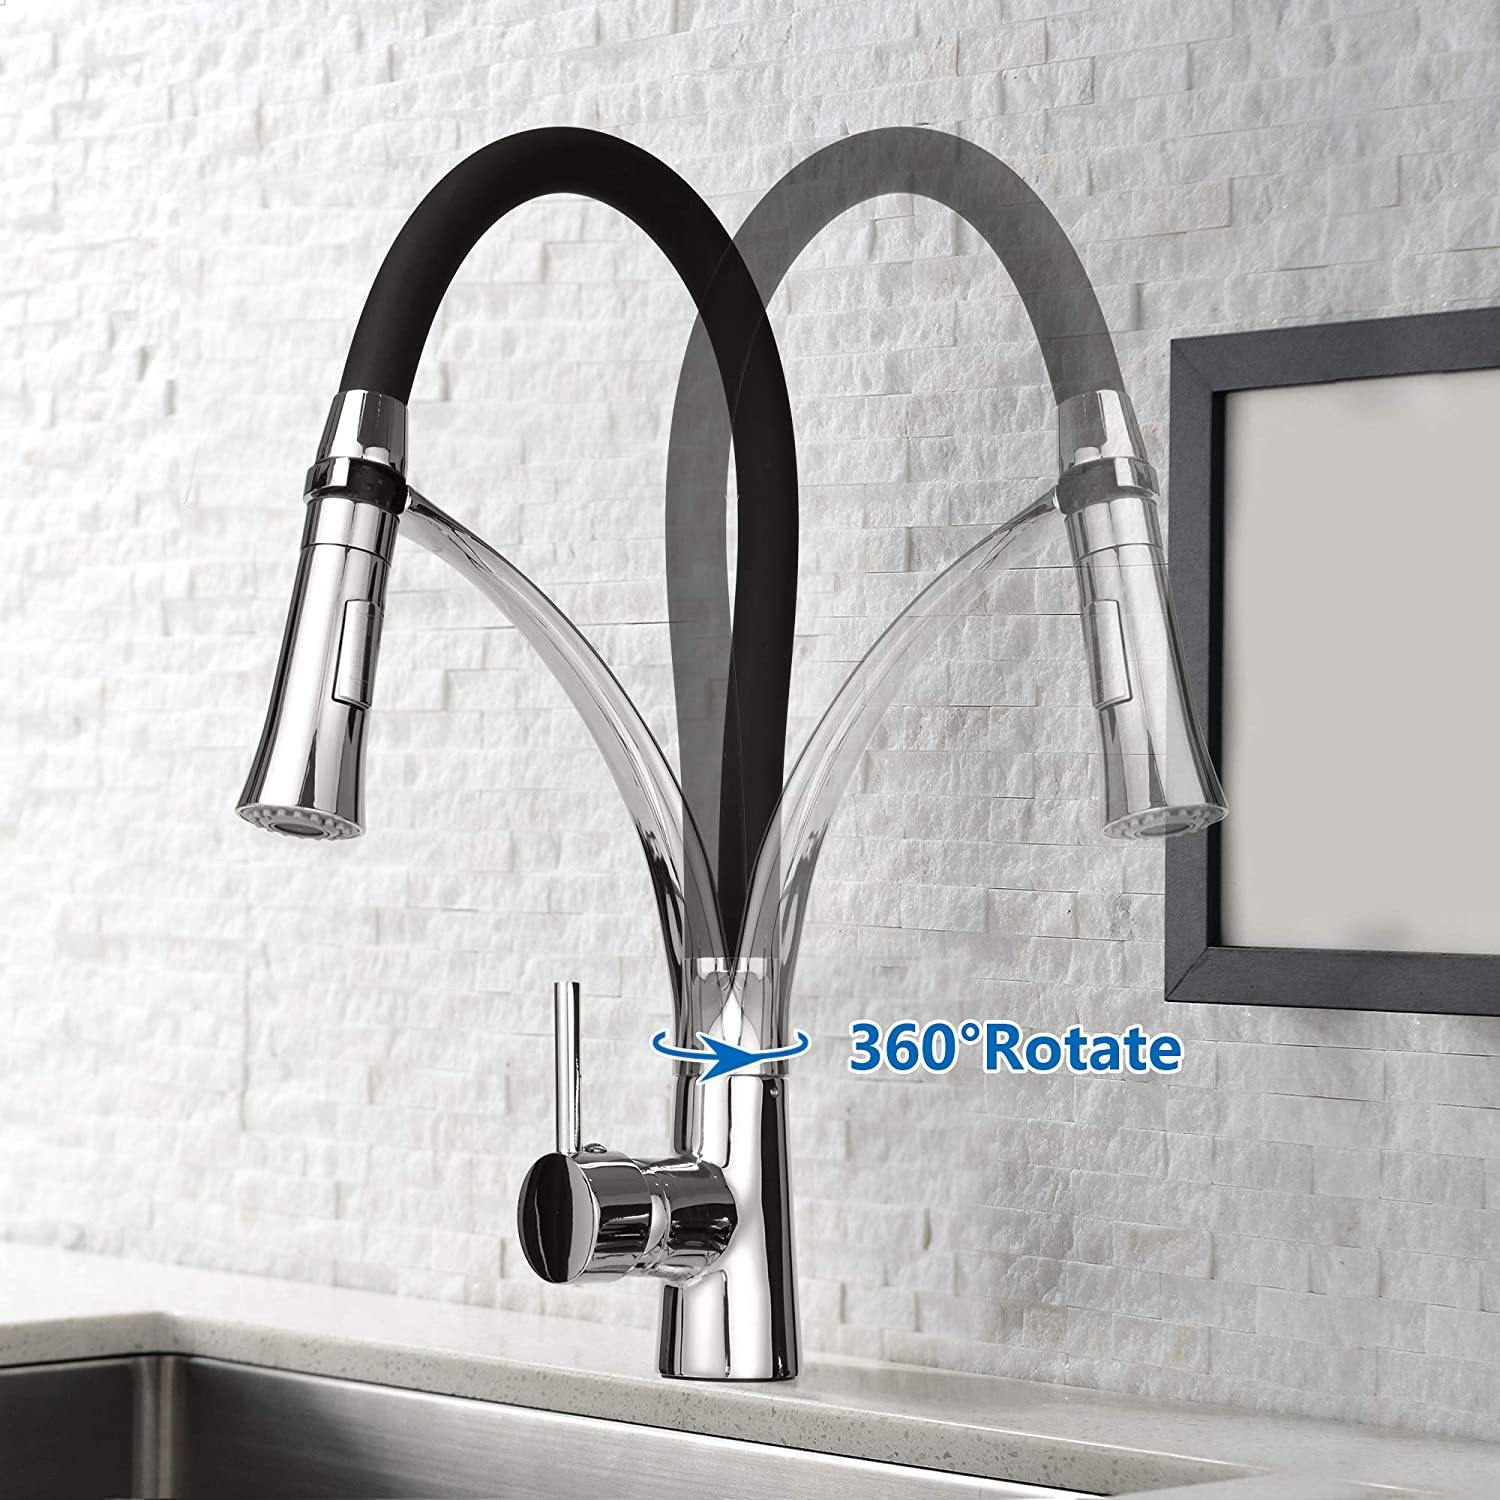 Kitchen Faucet with Pull Out Spray Head, Kitchen Sink Taps Mixer 360 Degree Rotation Swivel Spout Pull Out Spray Modern Kitchen Taps, Chrome - Bosonshop